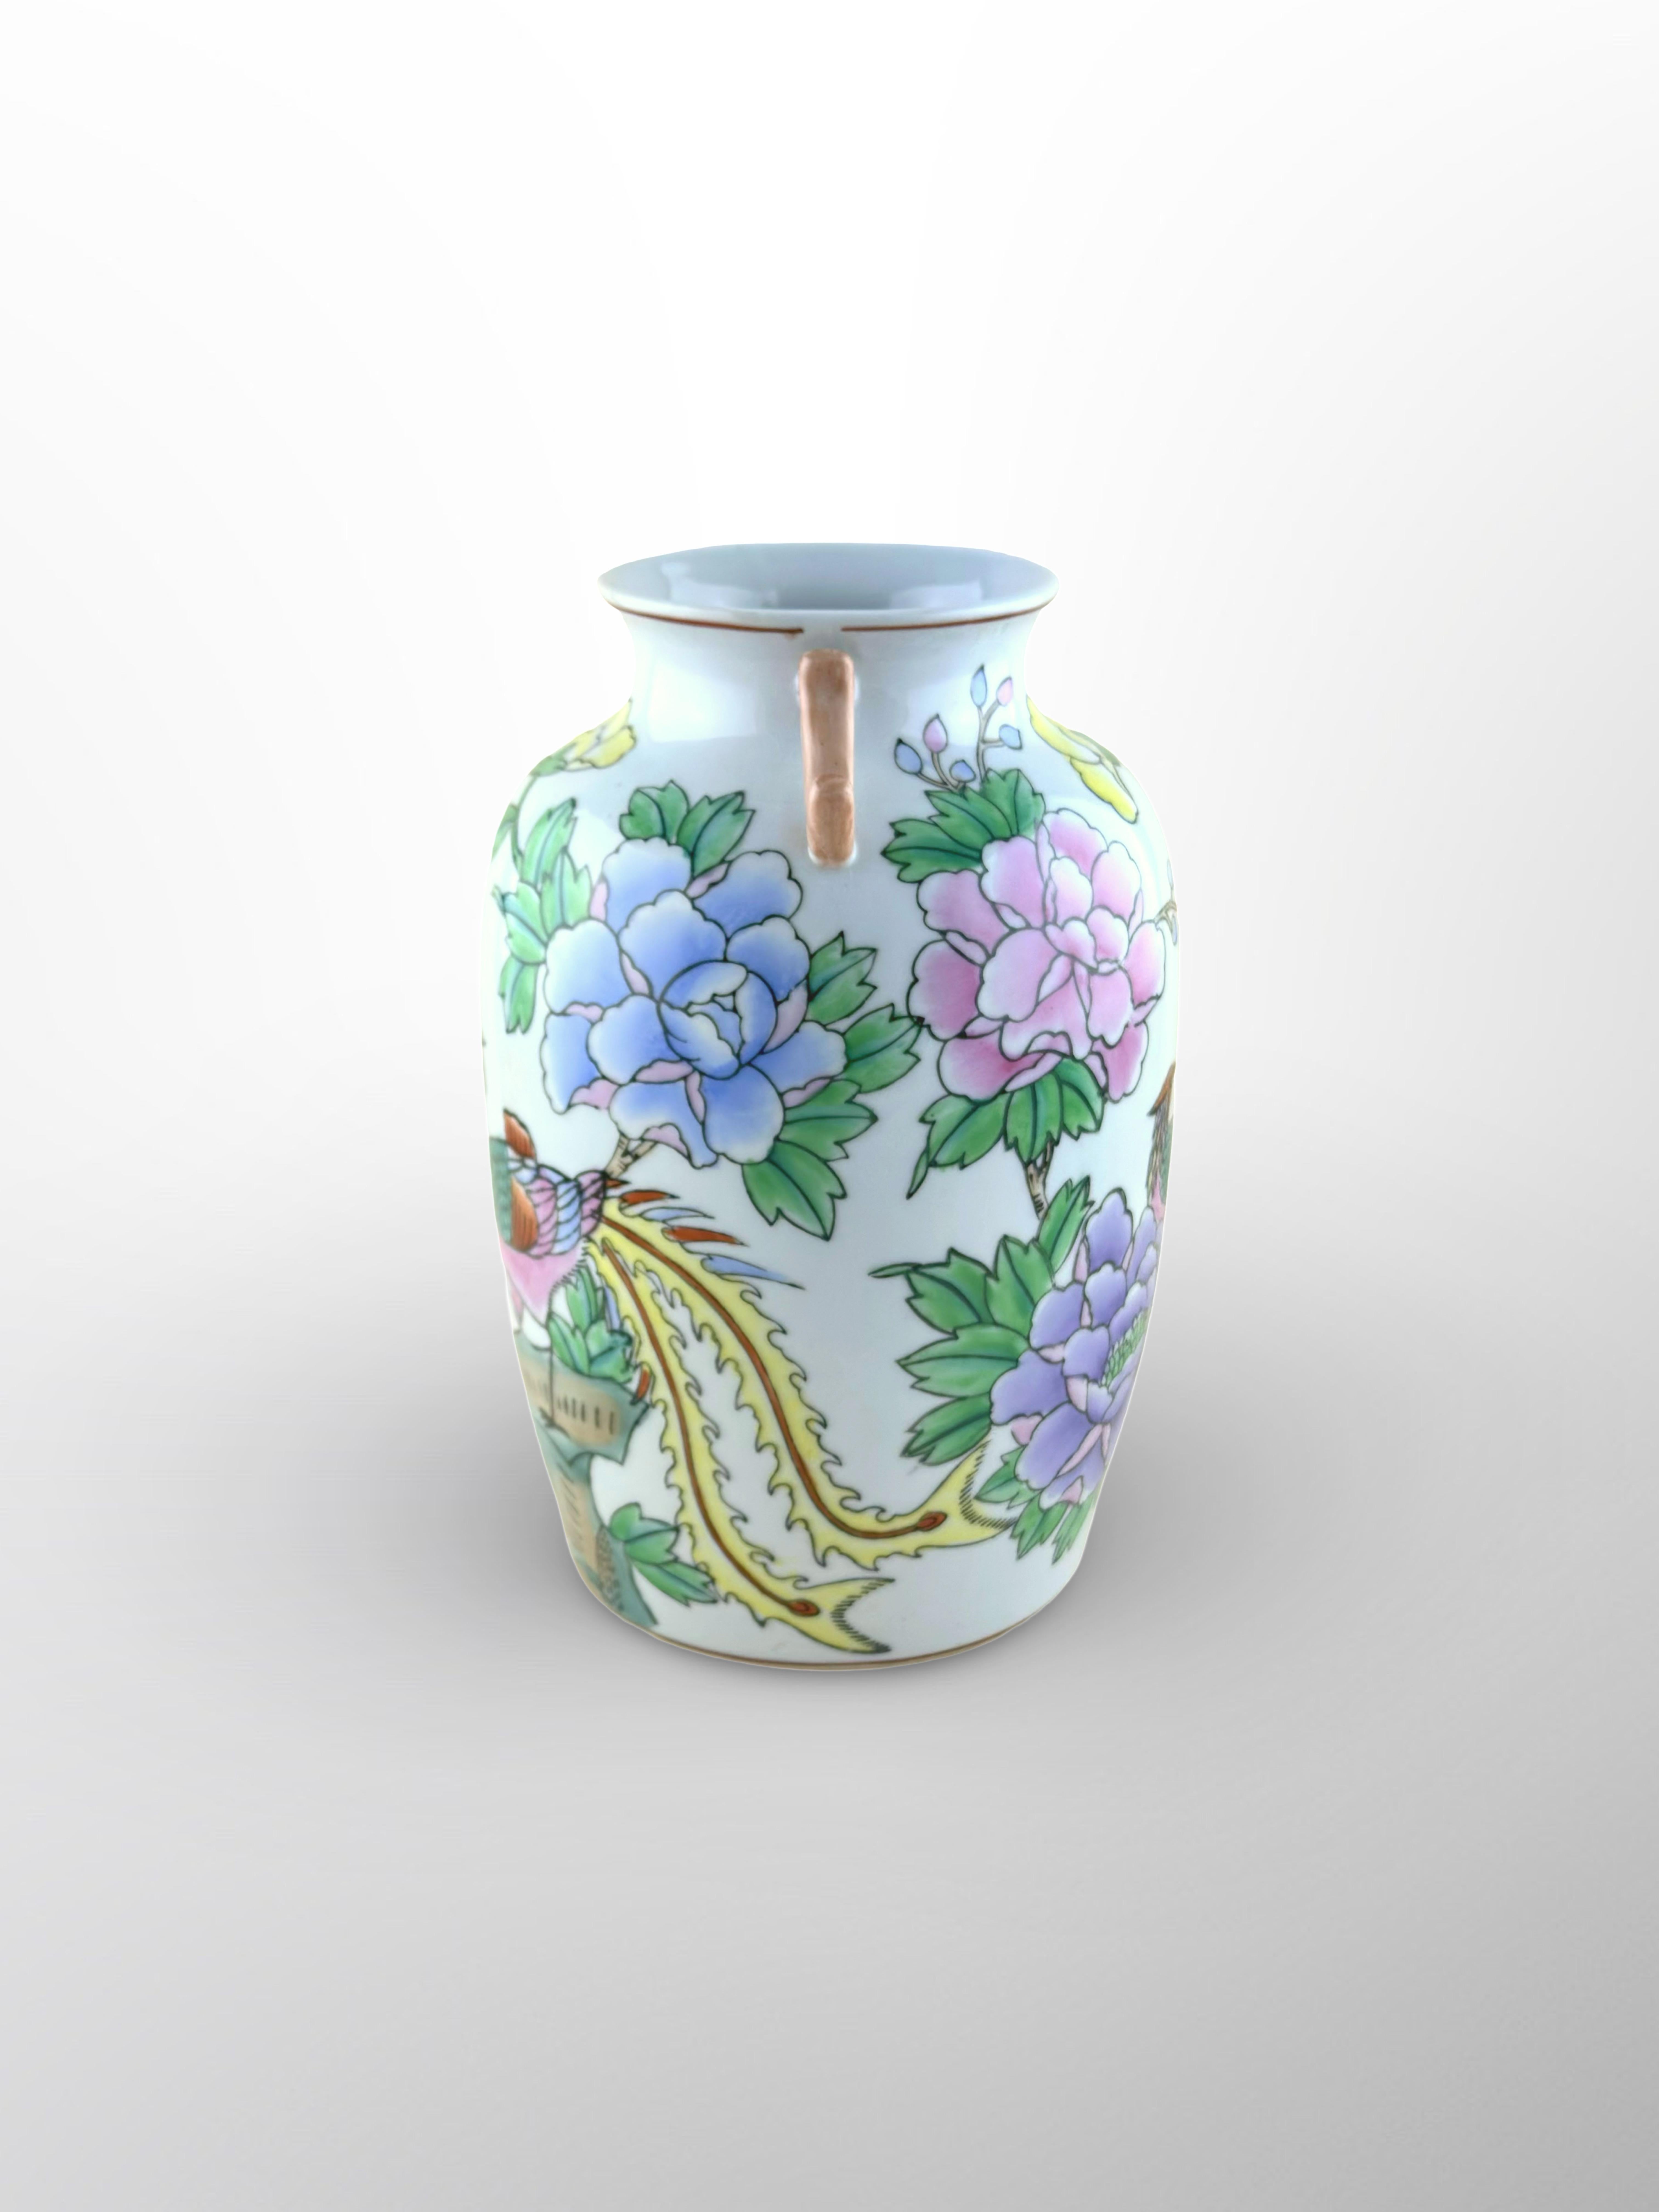 A vintage Kangxi-style Chinese vase, crafted in China around the latter half of the twentieth century, around the 1970s. 

The substantial porcelain vase was created in the 'Hu' shape, with a thick, bulbous body that extends upwards and transitions